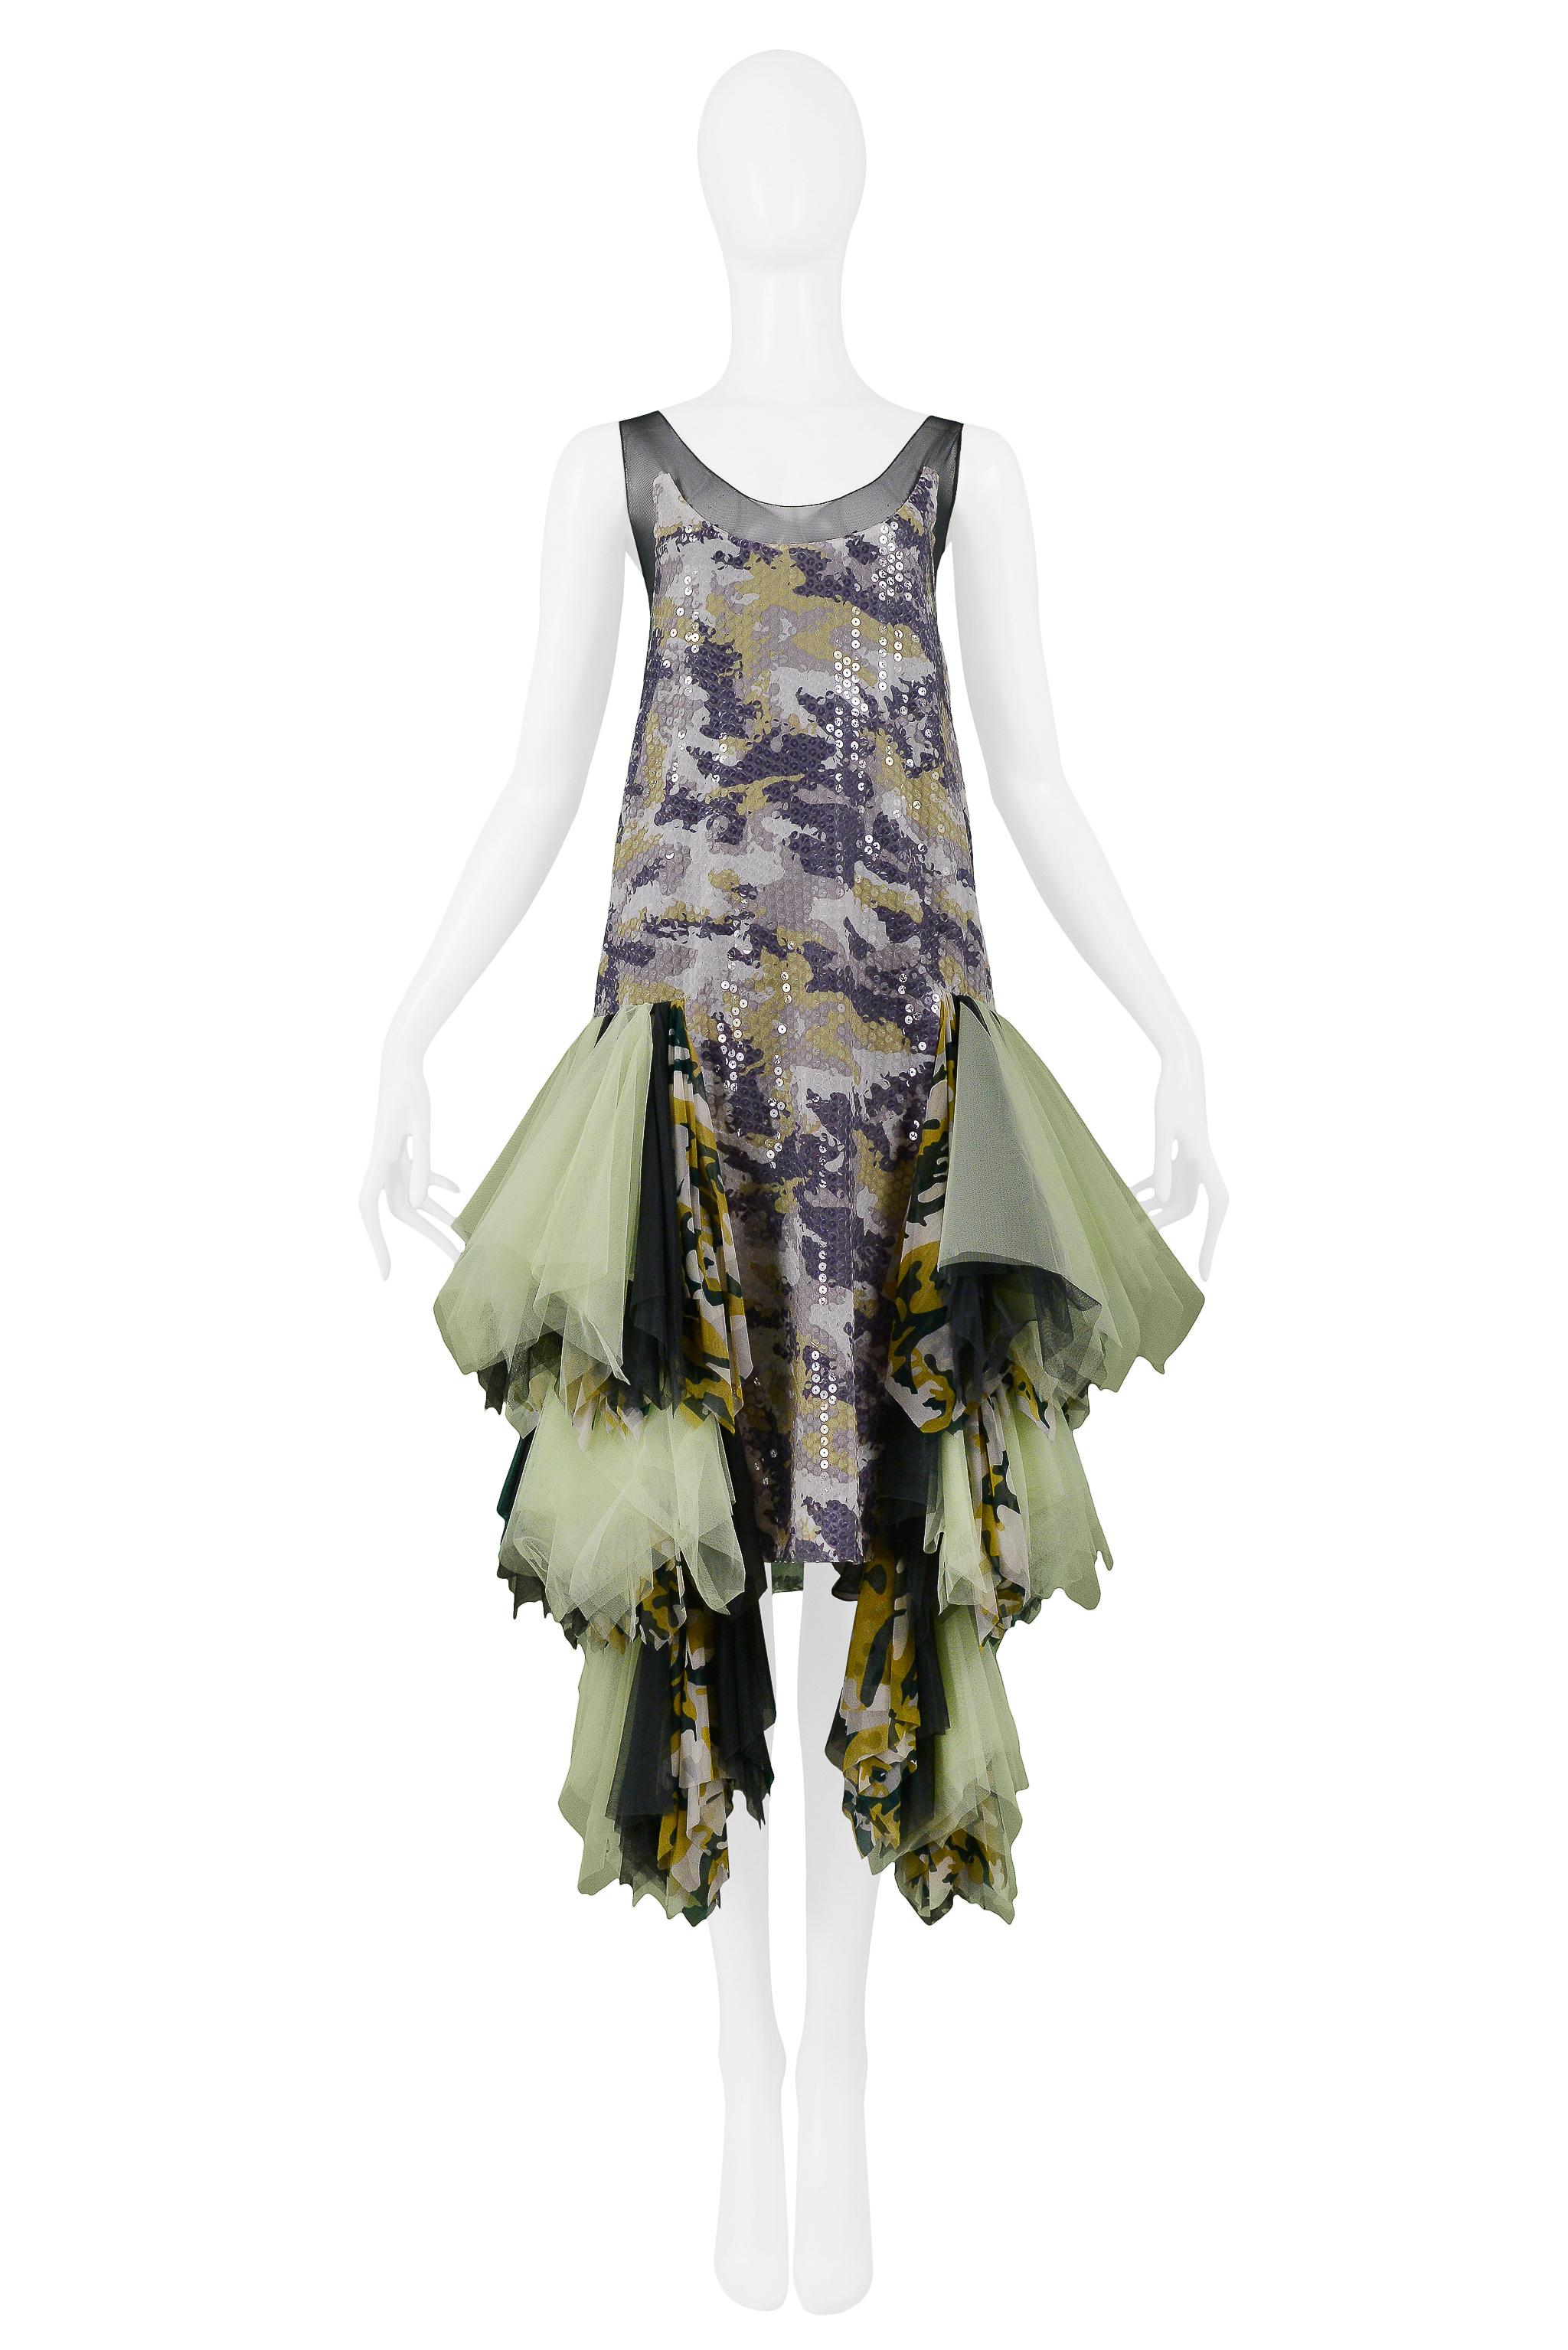 We are excited to offer an important vintage Alexander McQueen green, purple, and grey camo robe-de-style slip dress featuring sheer mesh straps, clear sequins, and multicolor green & camo chiffon ruffled tiers at hips. The dress fits like a vintage